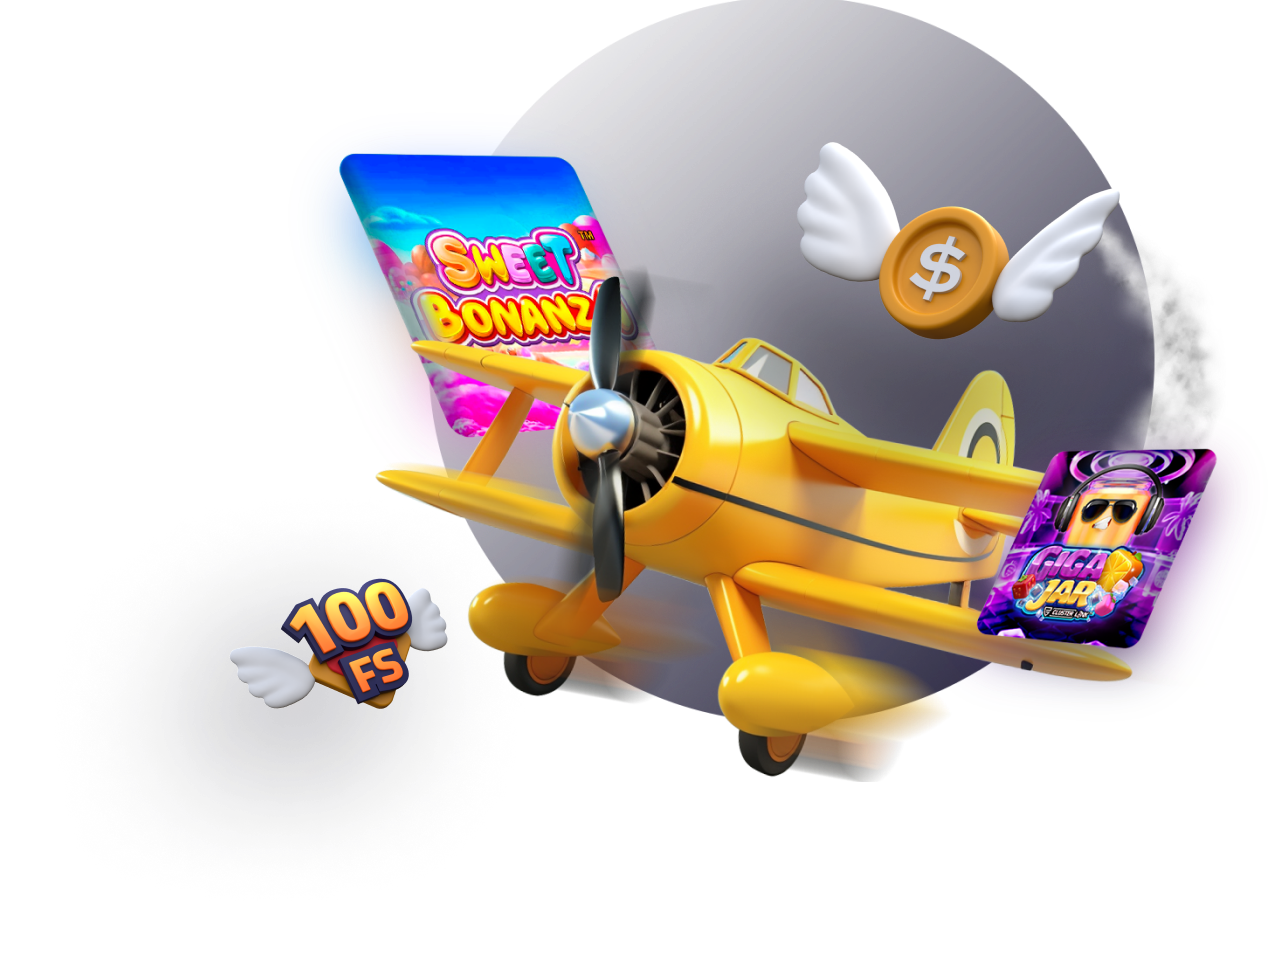 Yellow airplane and candy bar represent casino bonuses for players.